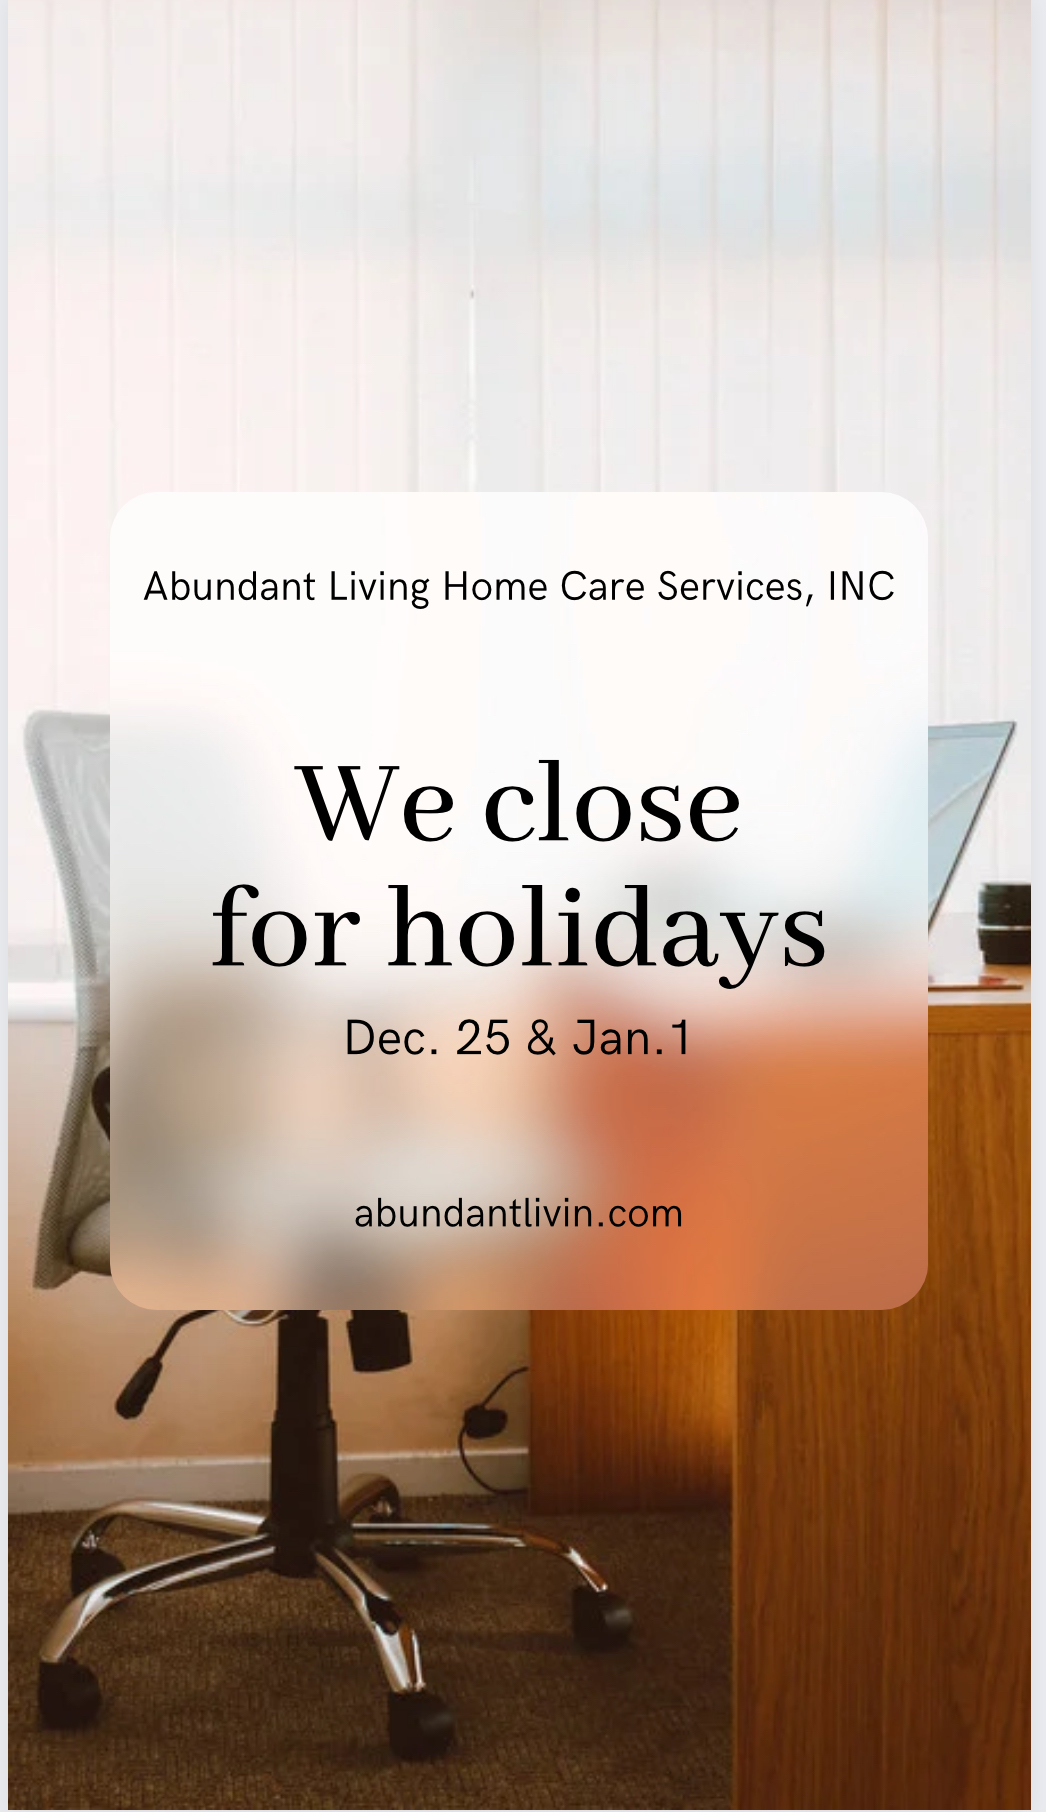 ABUNDANT LIVING HOME CARE SERVICES 5140 Kings Mountain Rd, Collinsville Virginia 24078